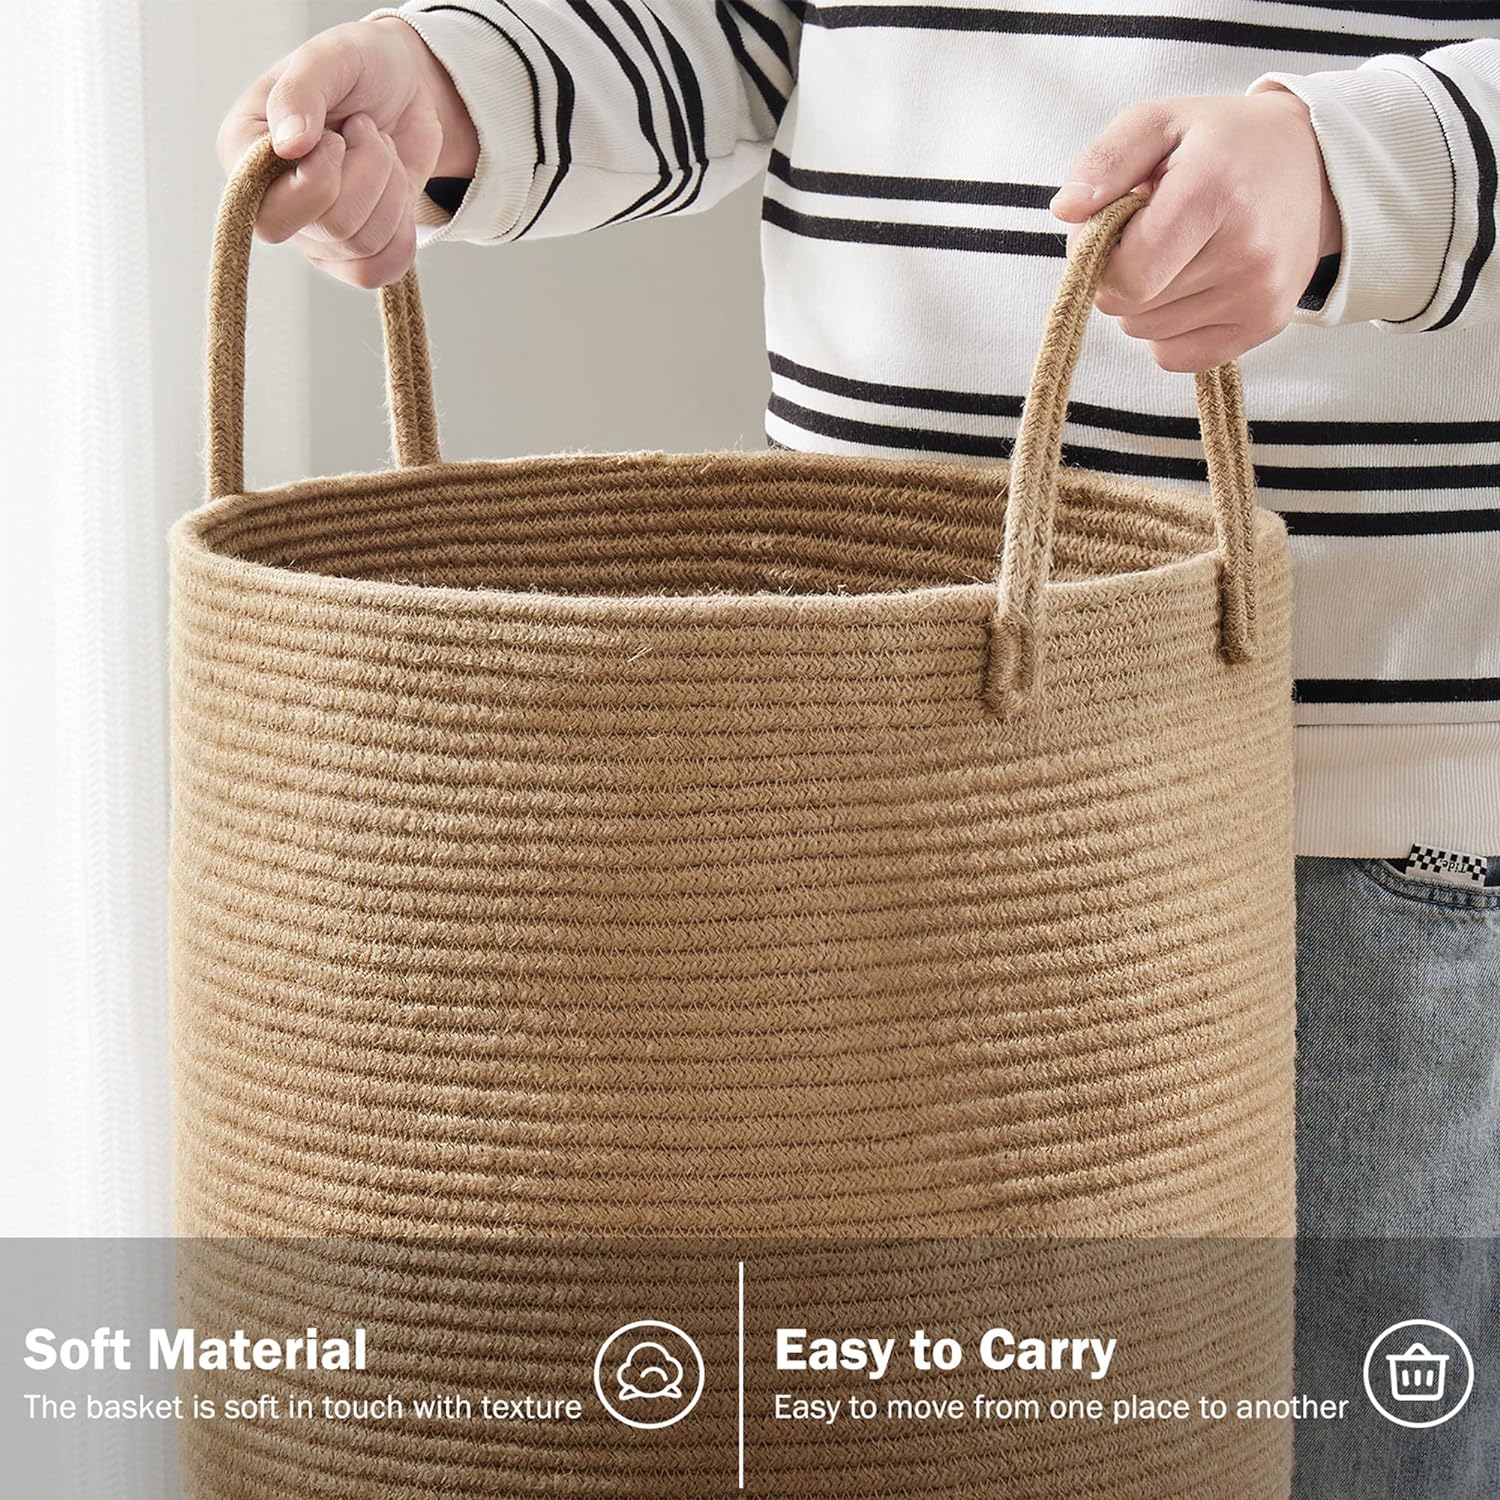 Great Choice Products Jute Rope Woven Laundry Hamper Basket By , 58L Tall Laundry Basket, Baby Nursery Hamper For Blanket Storage, Clothes Hampe